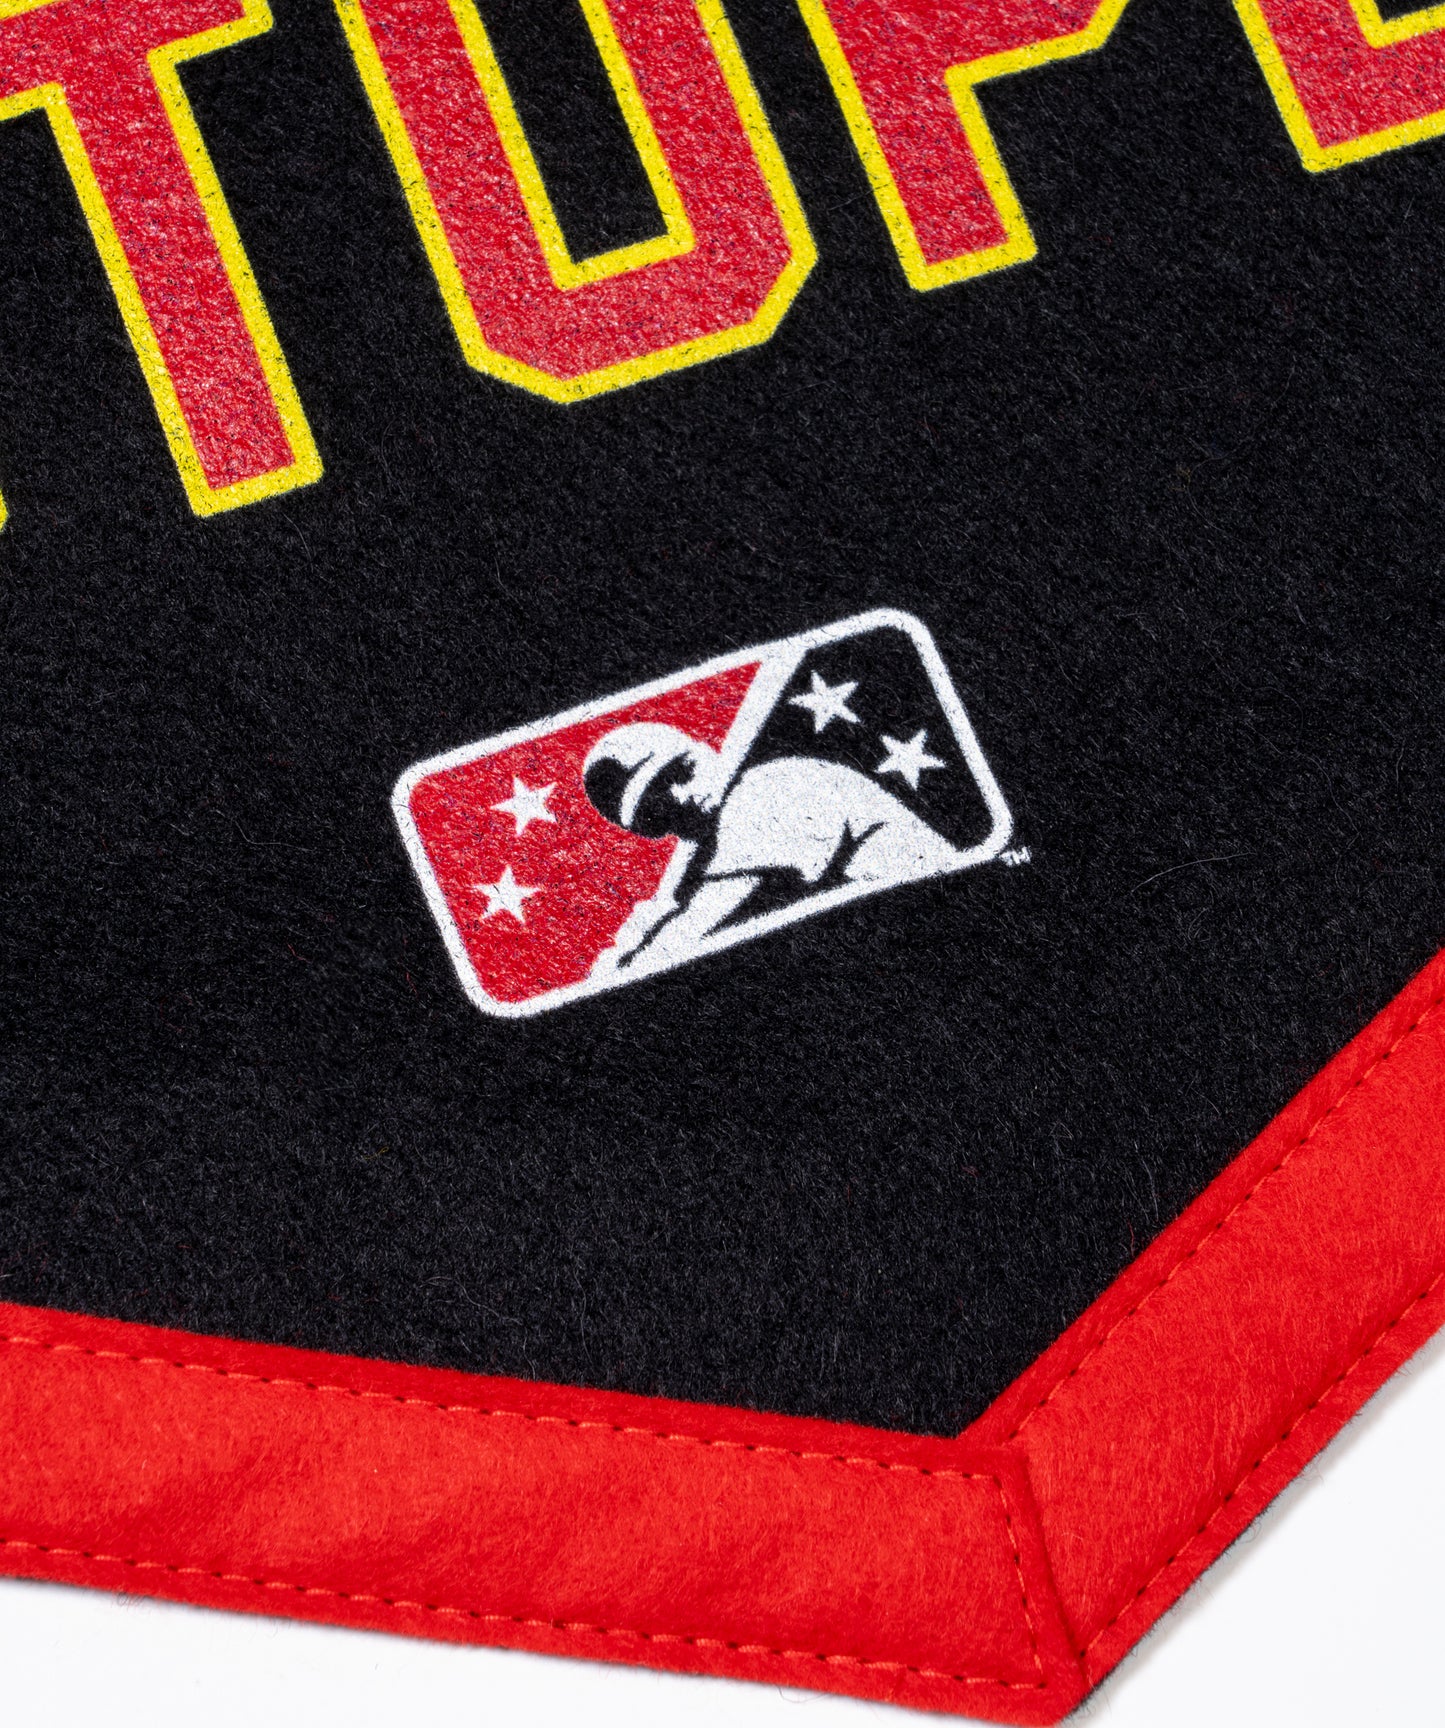 Let's Go Isotopes Camp Flag • MiLB x Oxford Pennant